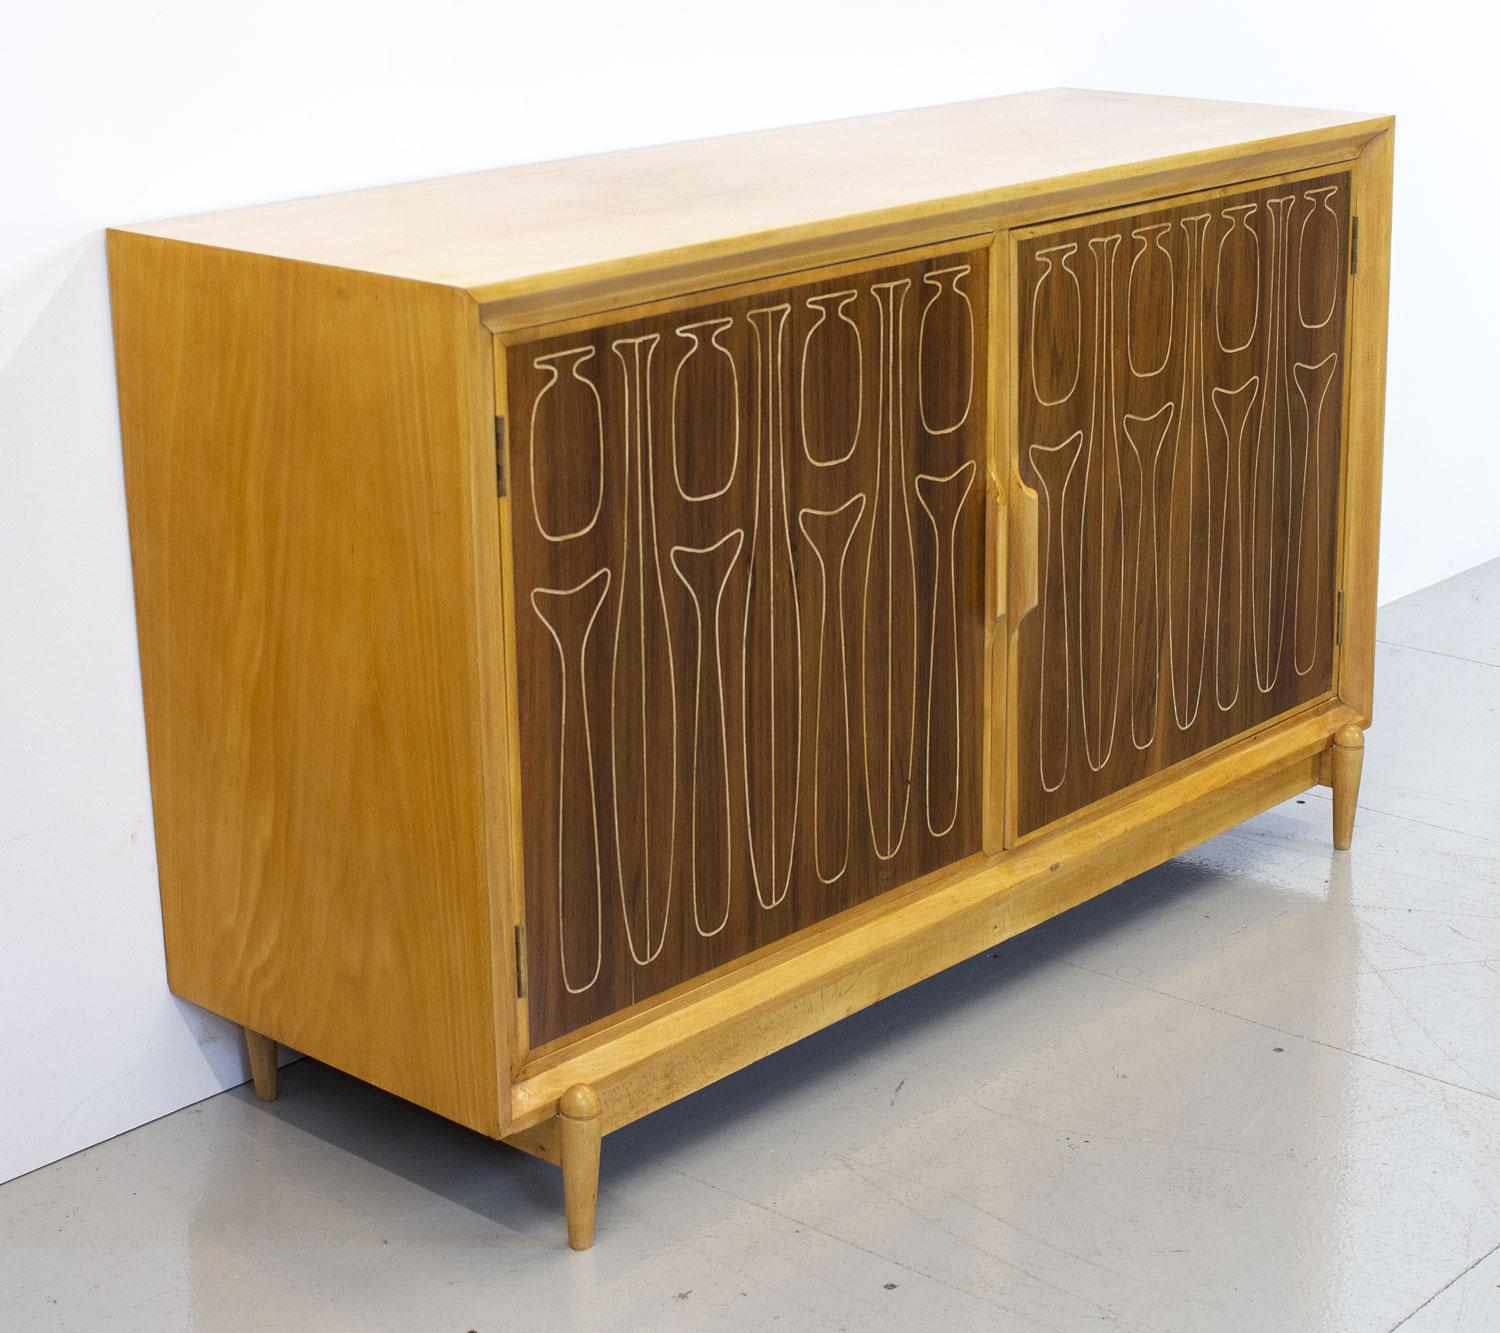 Beech 1950s Indian Laurel Sideboard by Kelvin McAvoy for Liberty’s